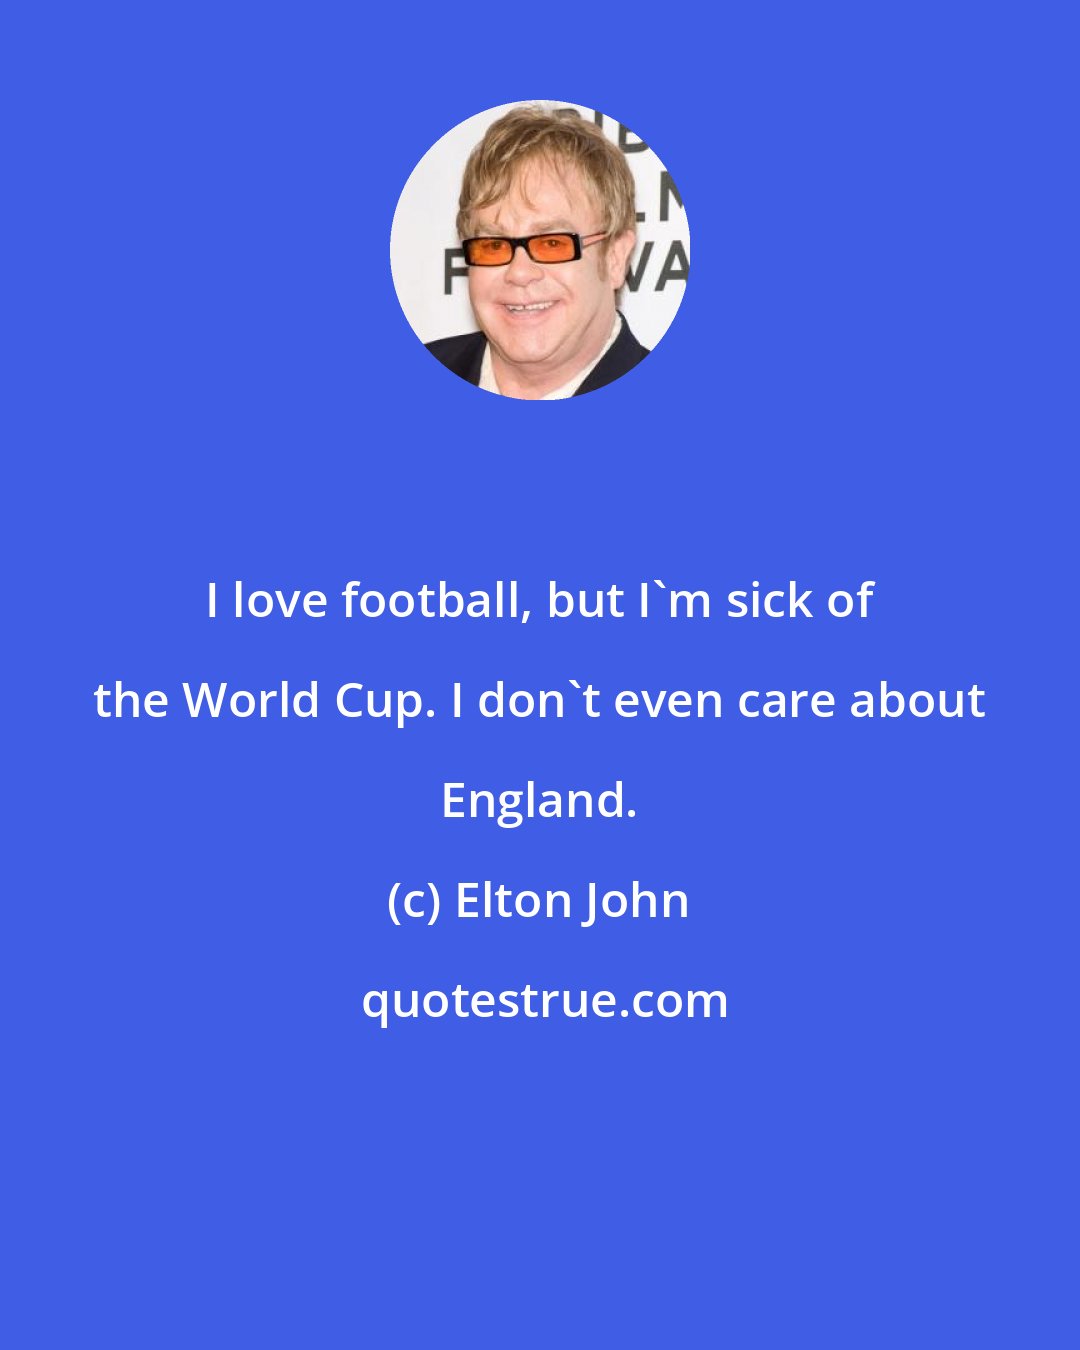 Elton John: I love football, but I'm sick of the World Cup. I don't even care about England.